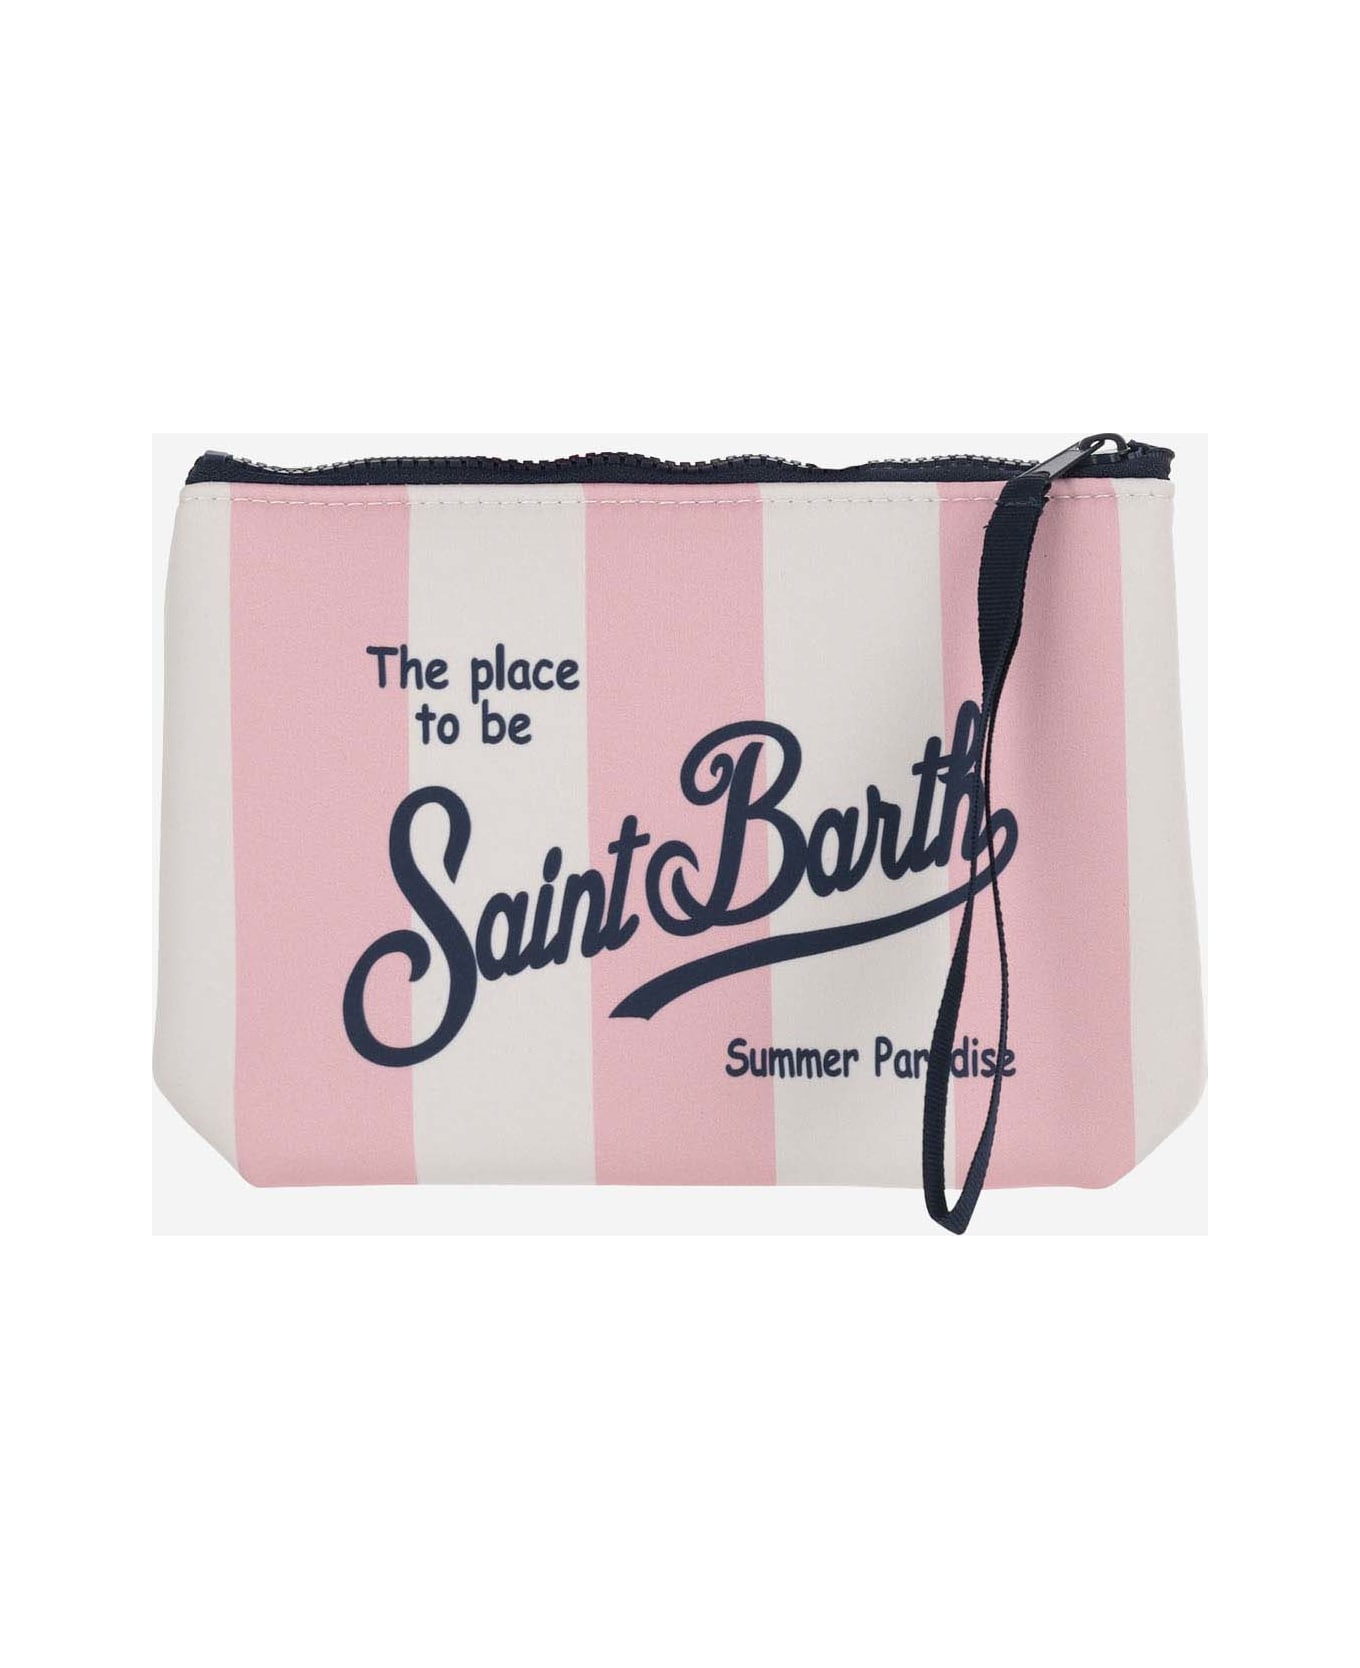 MC2 Saint Barth Scuba Clutch Bag With Striped Pattern - Red クラッチバッグ